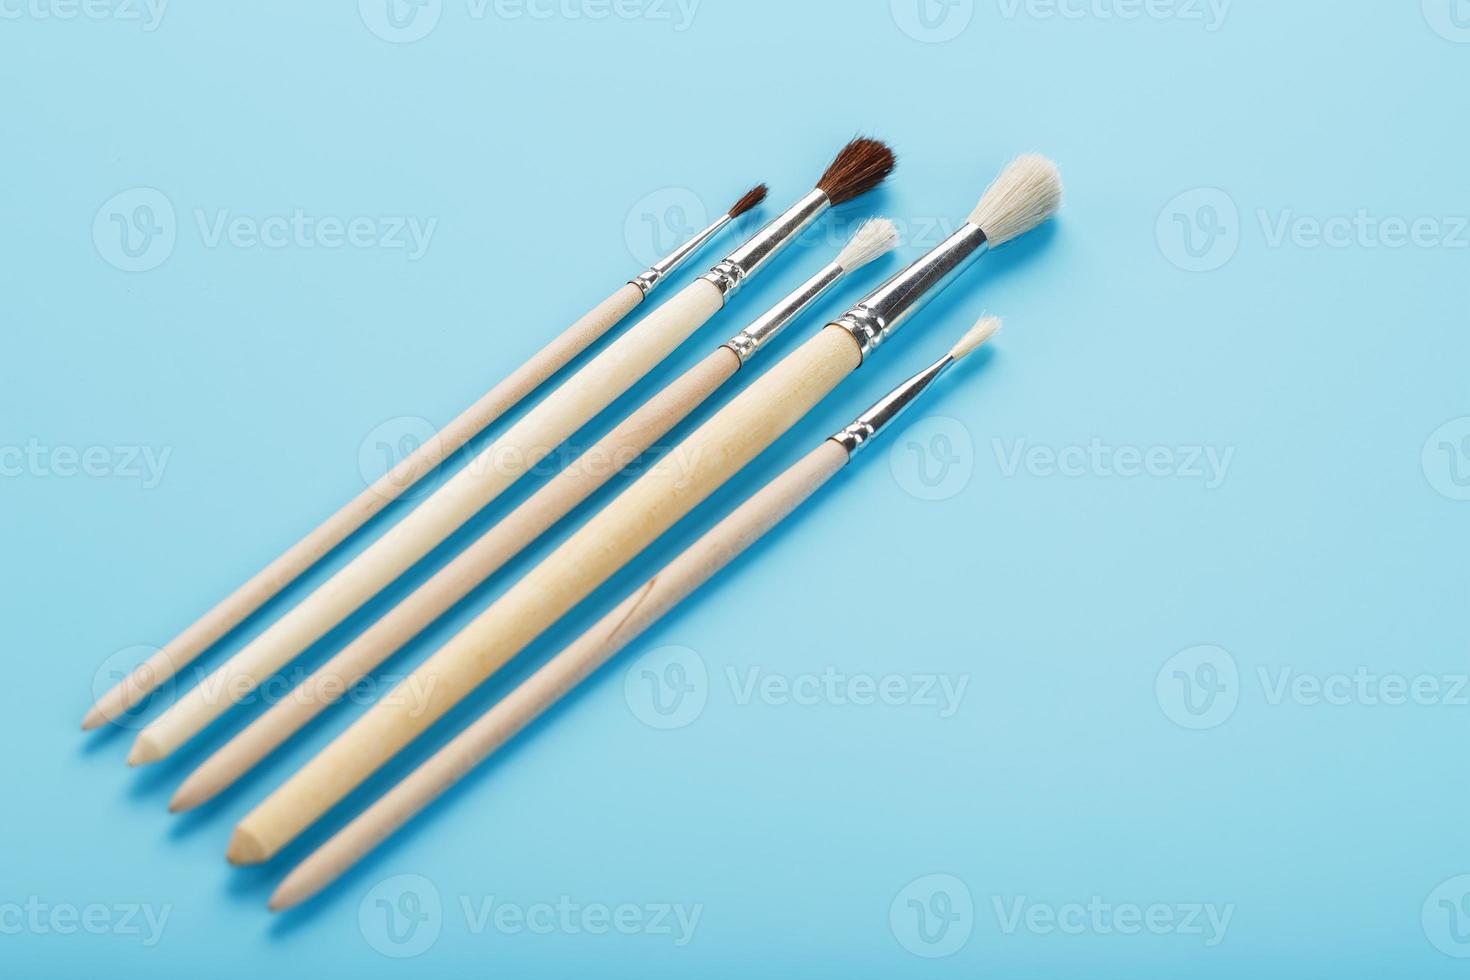 Brushes for drawing with paints made of natural wood and wool on a blue background. photo